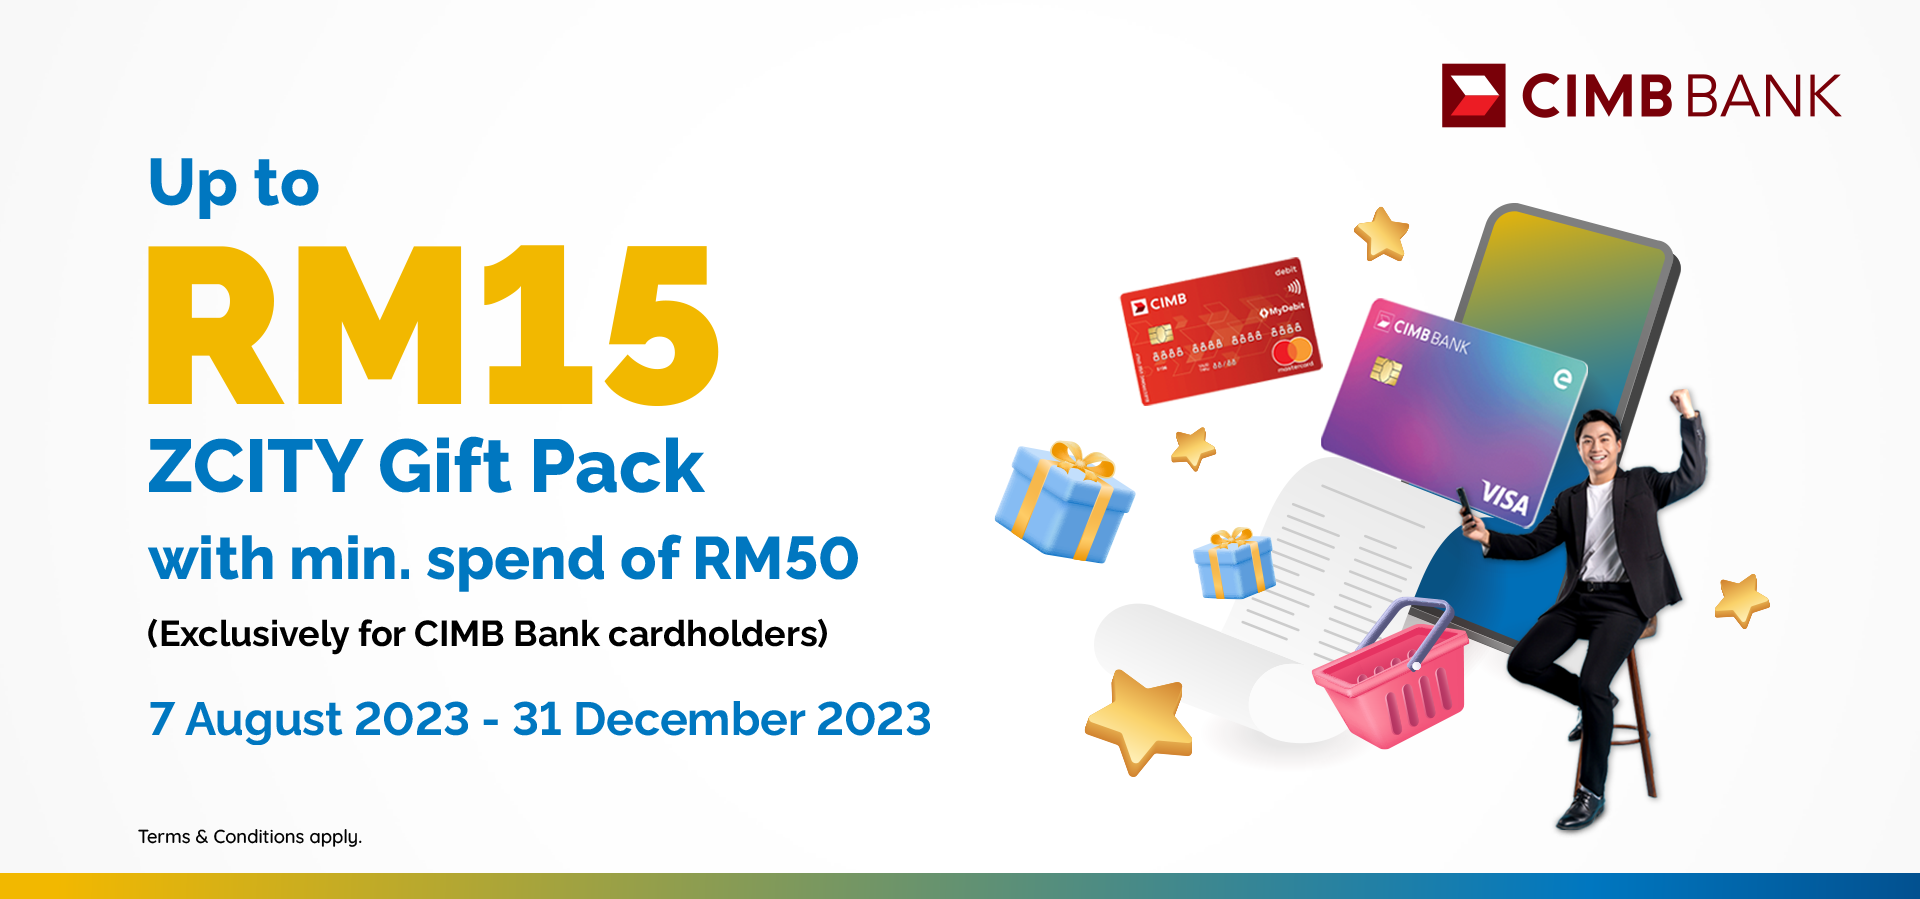 RM15 ZCITY Giftpack with CIMB Cards